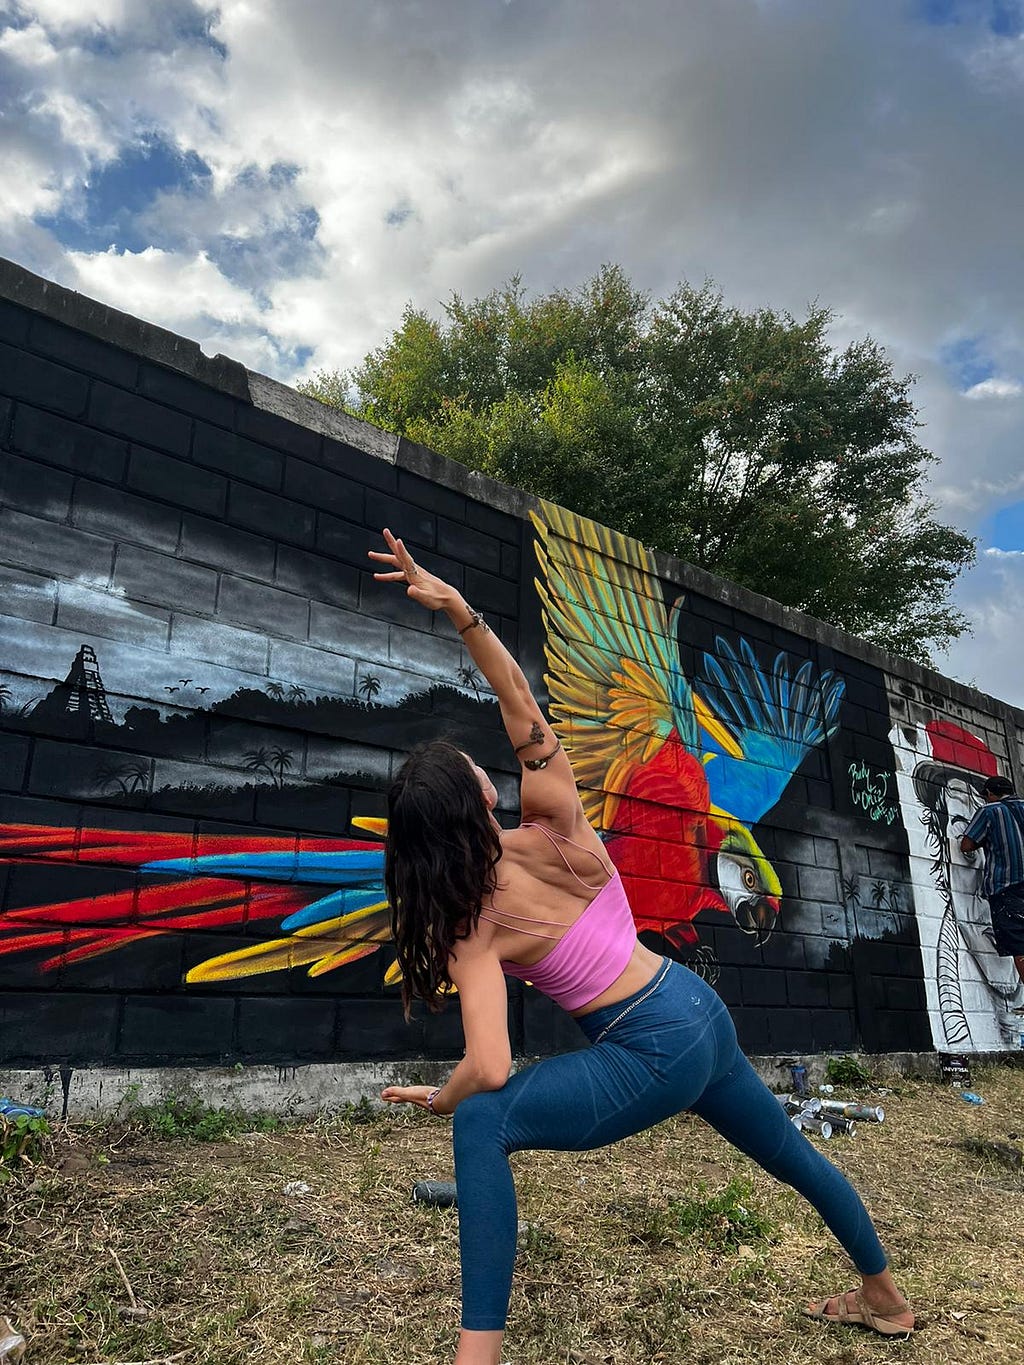 Me in a yoga pose with all the arm jewelry, in front of a beautiful mural…a colorful bird in the foreground, black and white landscape in the back.